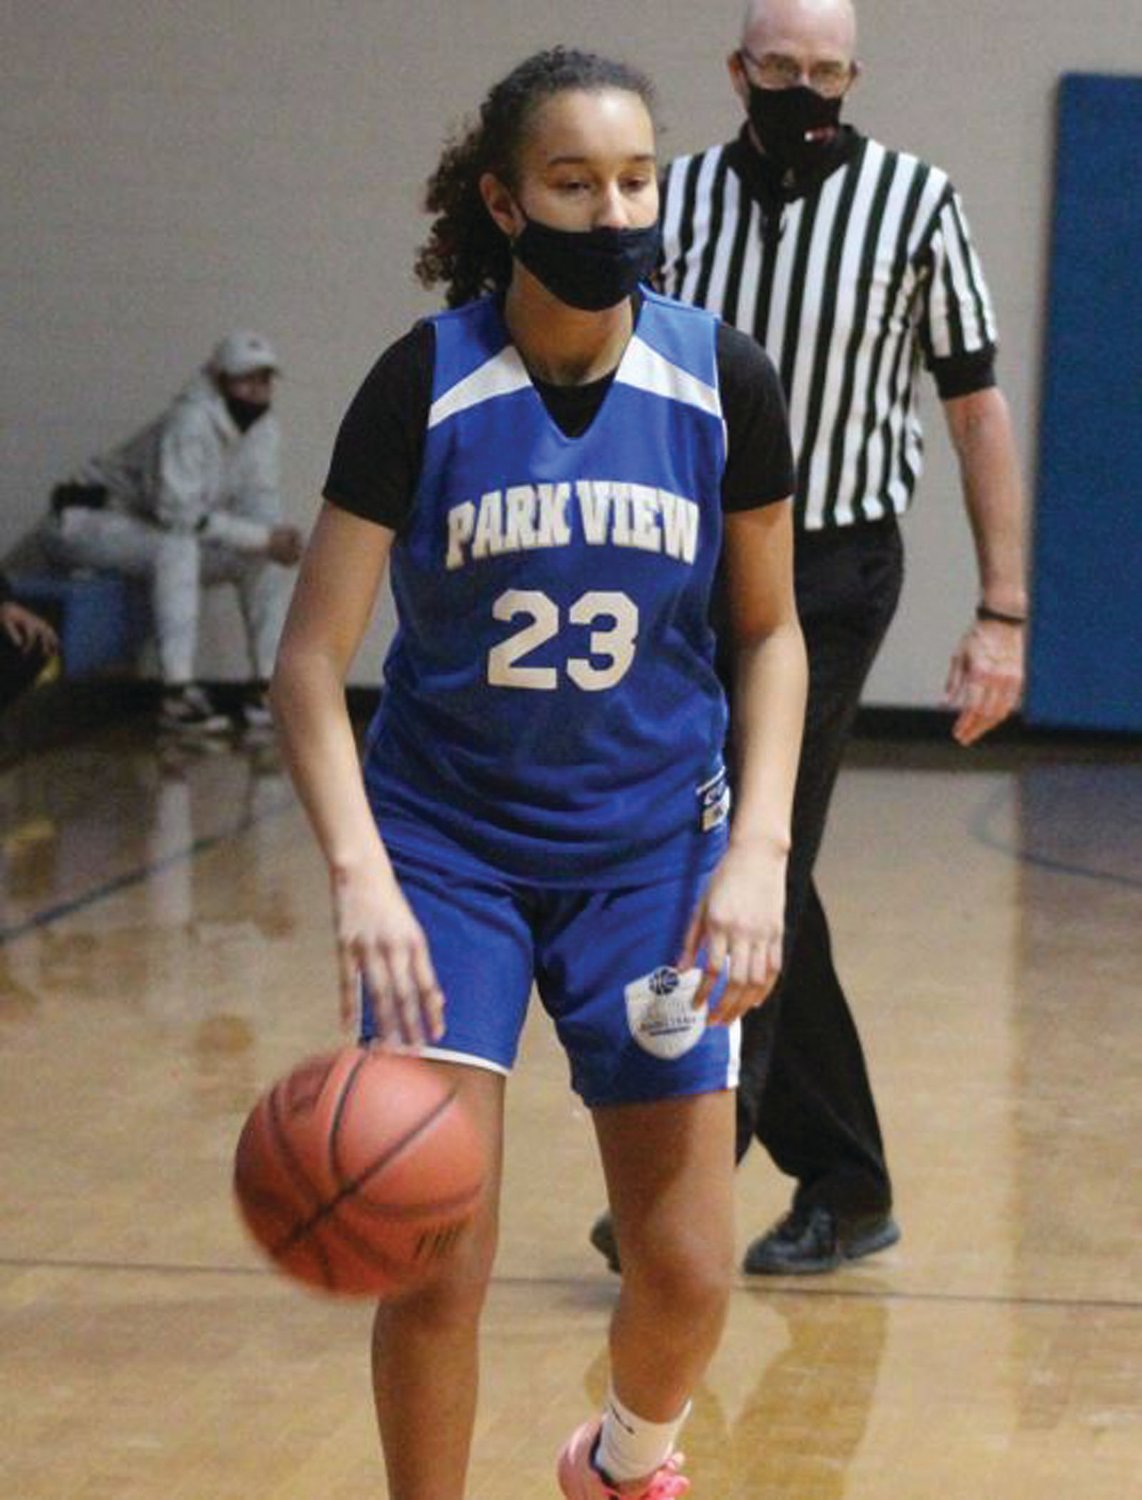 IN THE PAINT: Park View’s Sinayya Chase dribbles up the court.